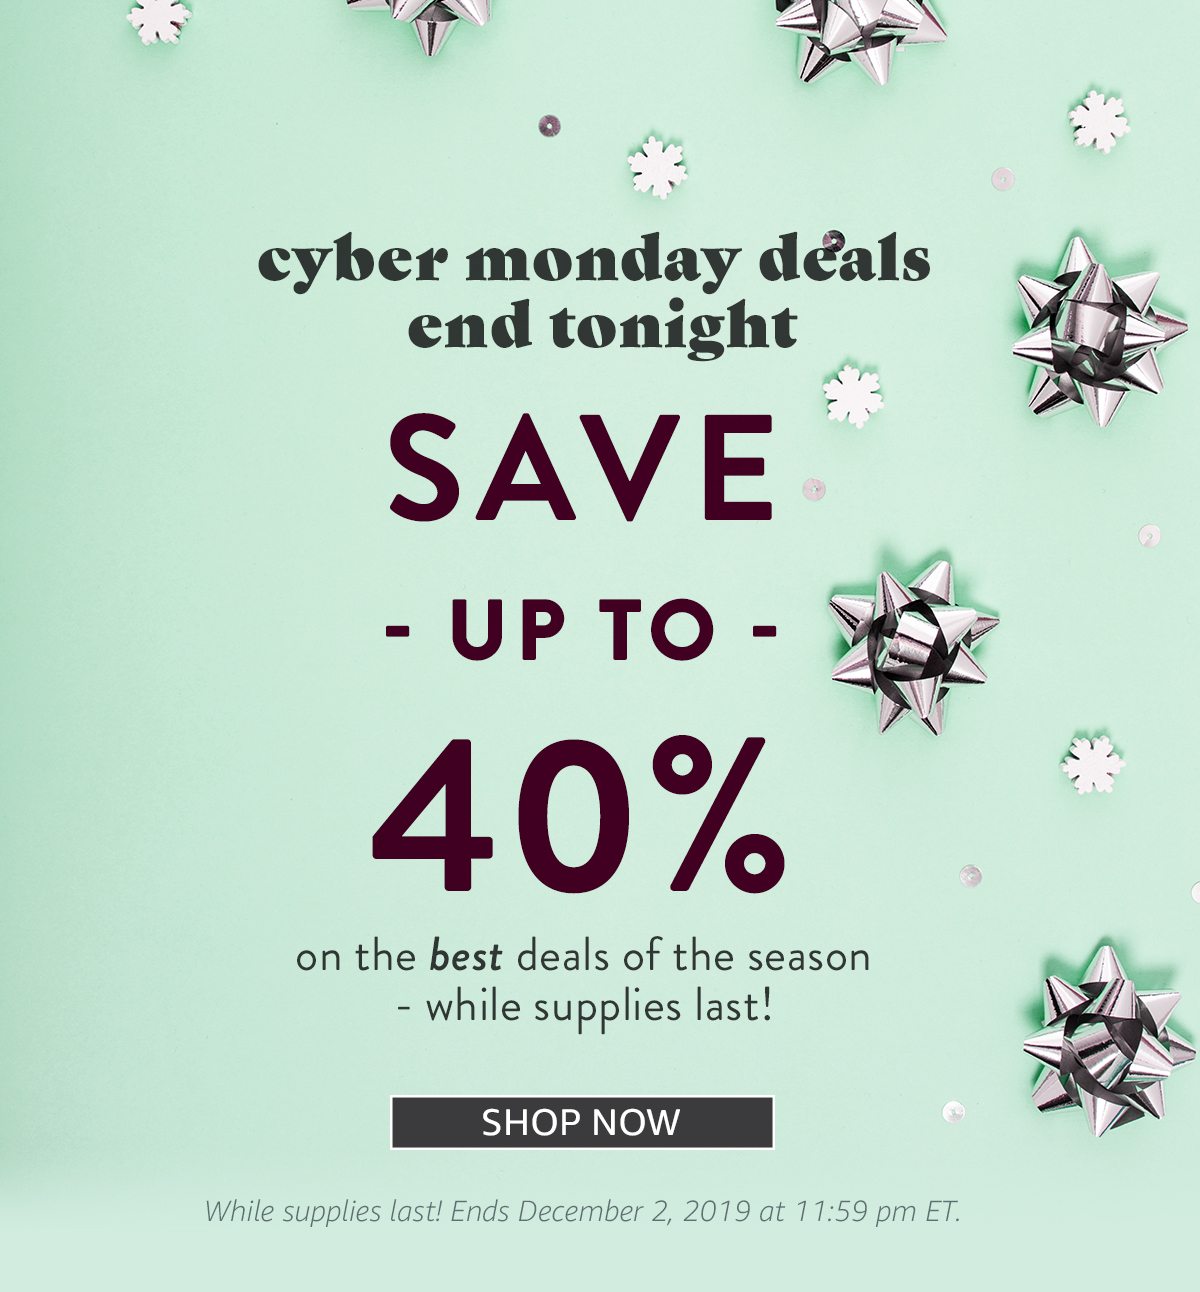 Cyber Monday: Our Best Deals of the Season have arrived | SAVE 40% | SHOP NOW